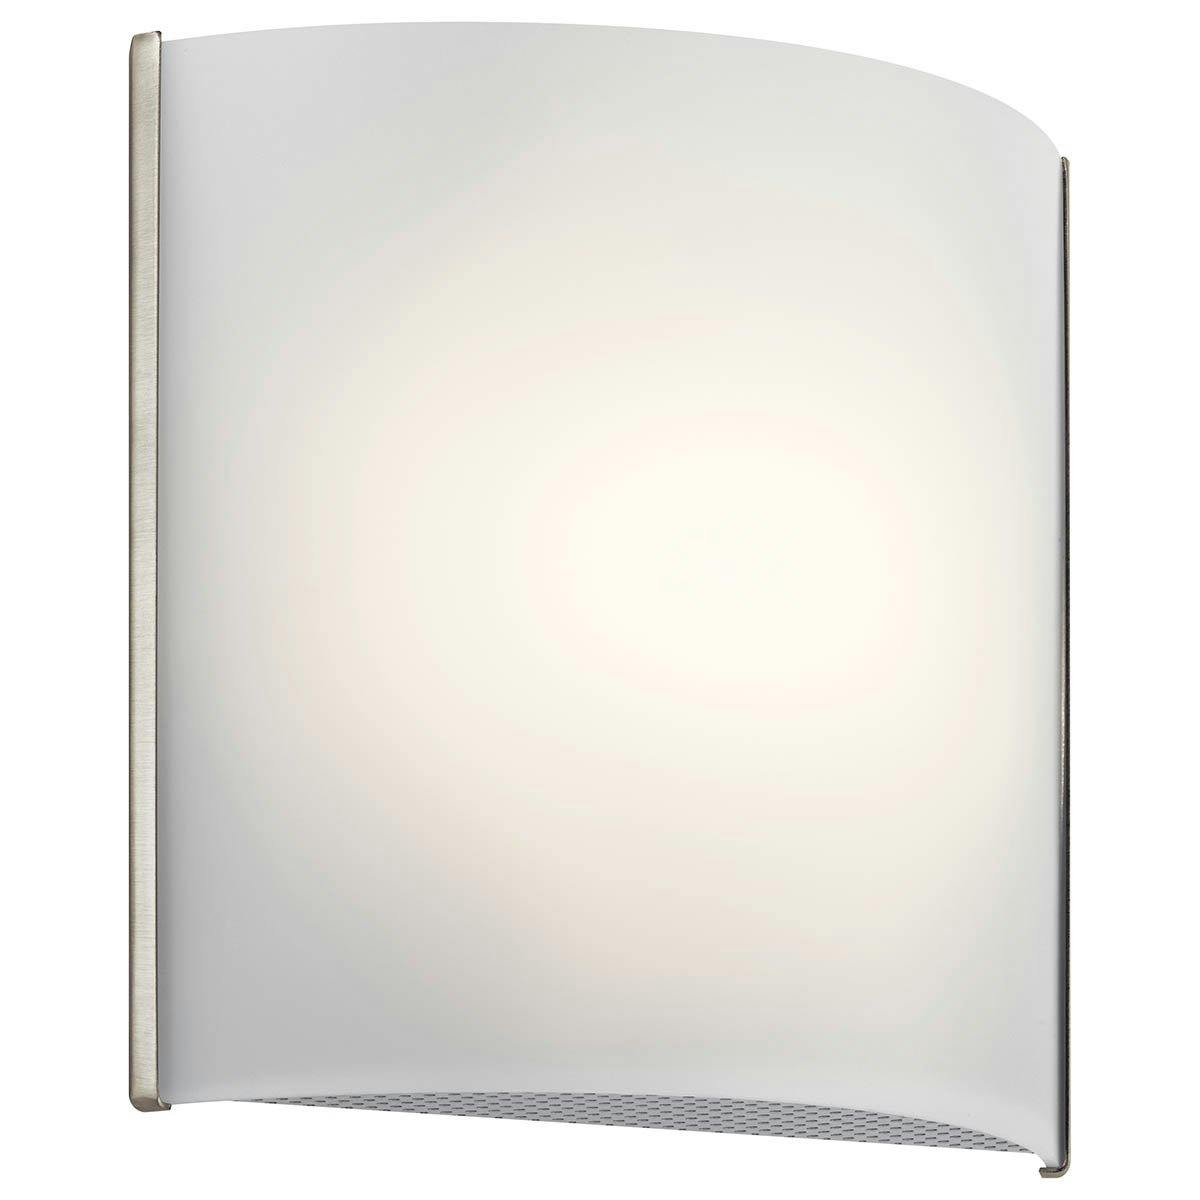 8" LED Wall Sconce Brushed Nickel on a white background